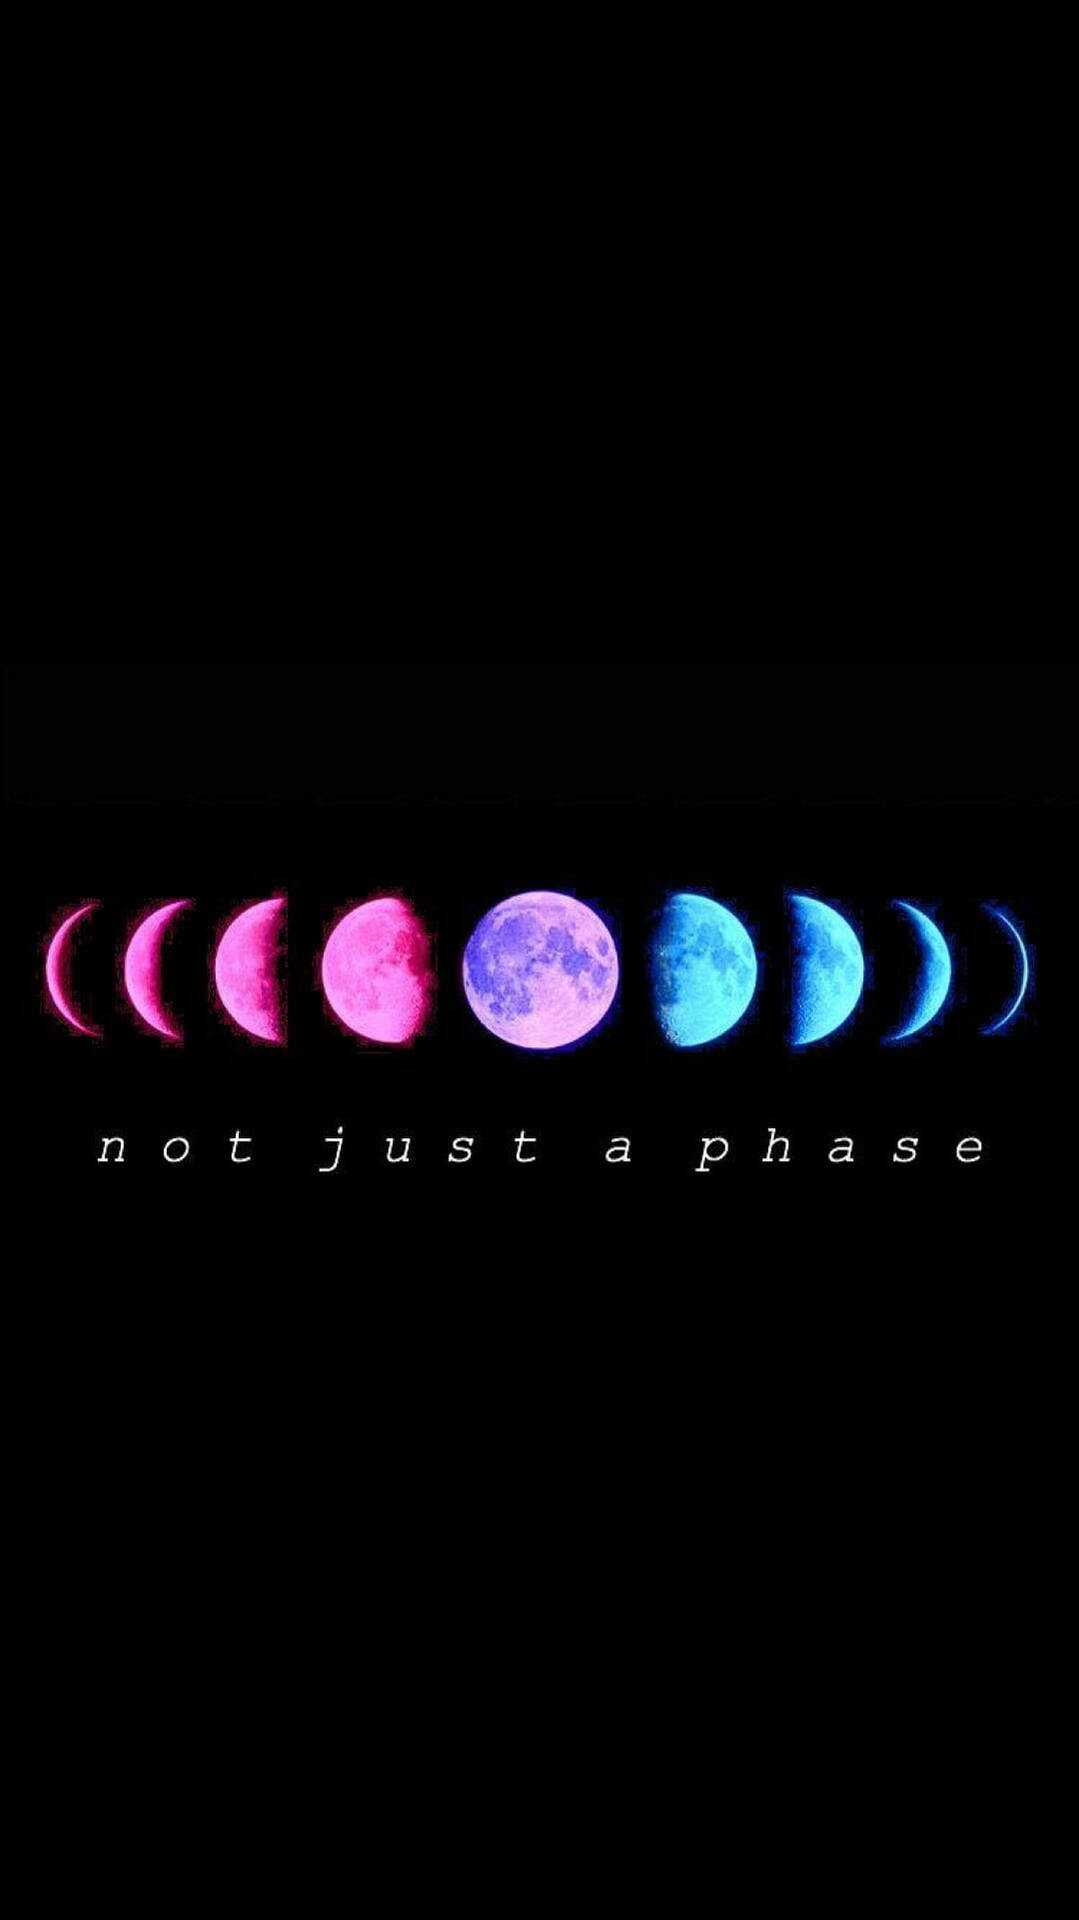 Download Lgbt Not A Phase Wallpaper